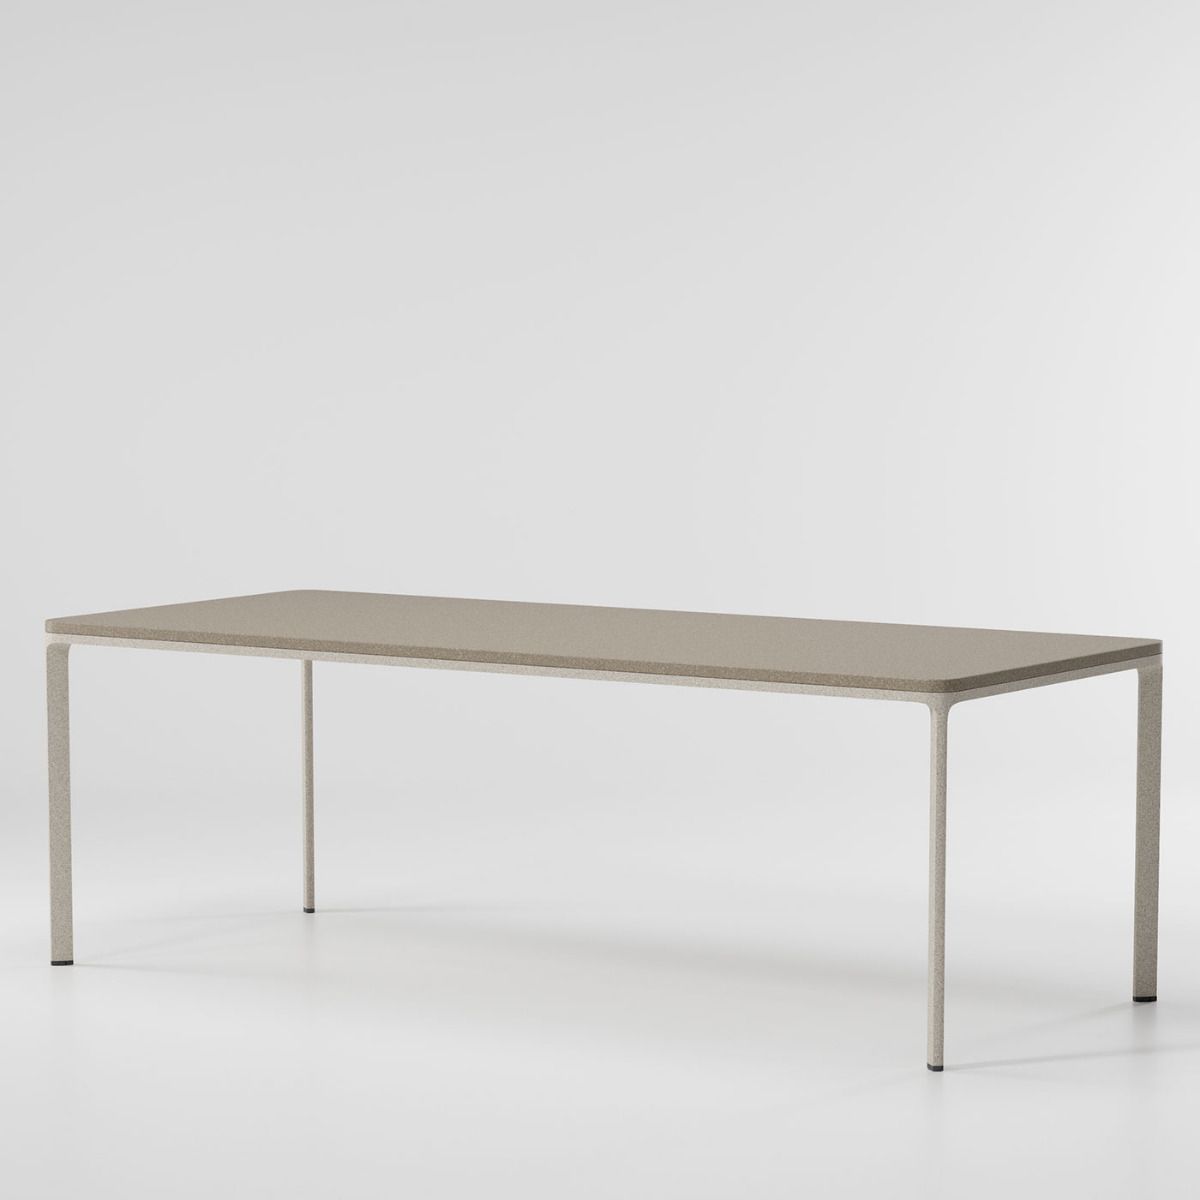 Kettal Park Life Dining Table 220x94 - 8 Guests